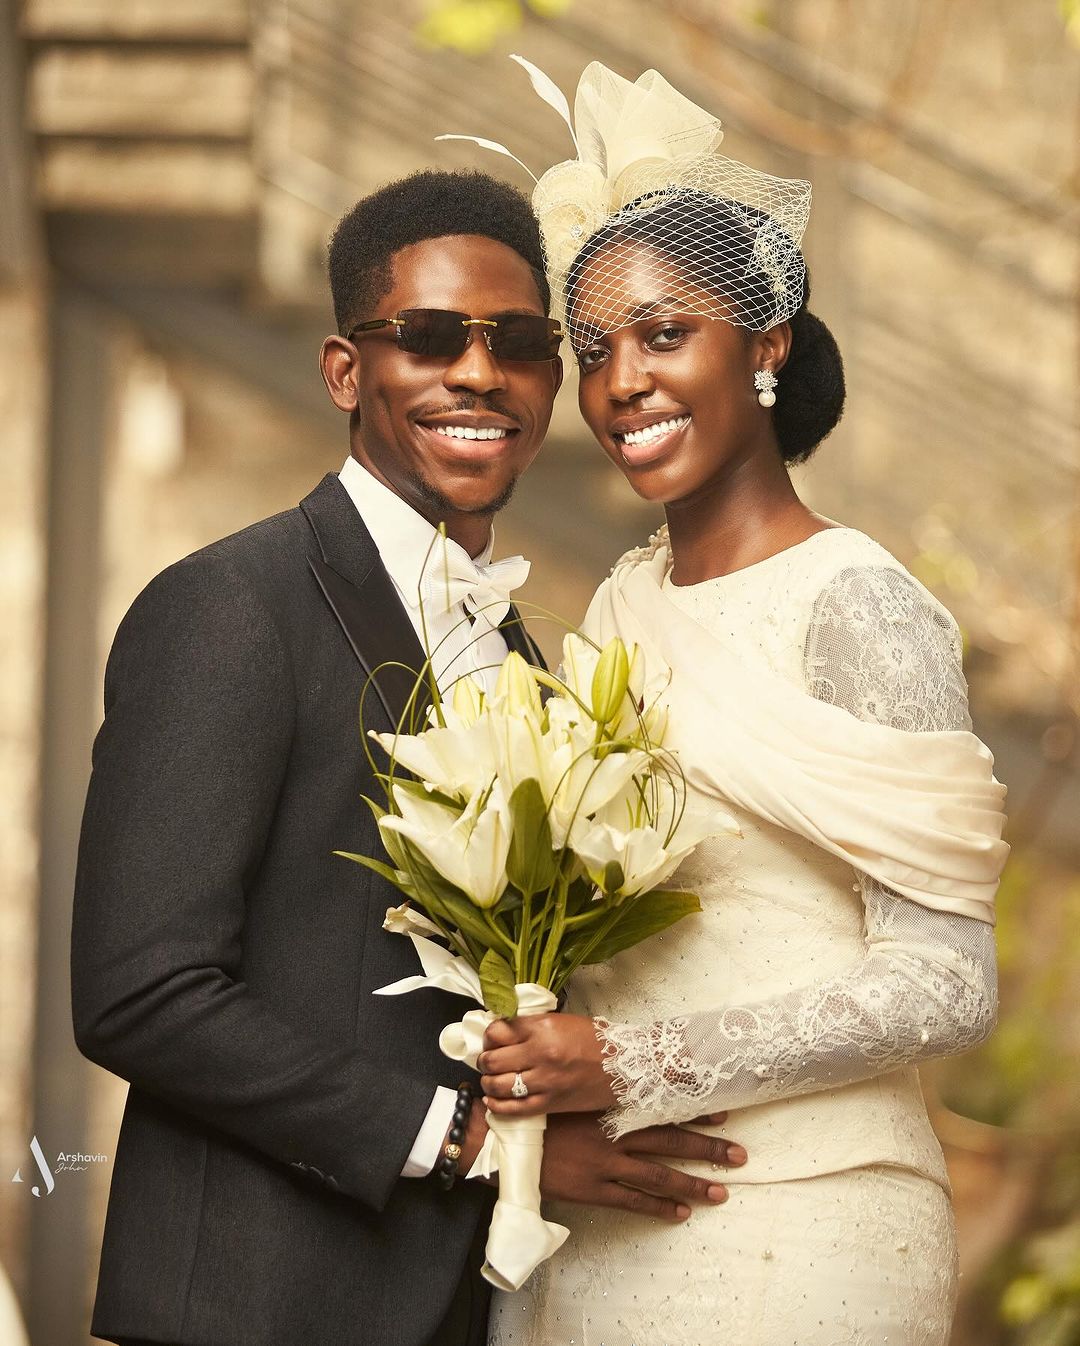 Moses Bliss Ties The Knot With Ghanaian Fiance, Marie | Fab.ng